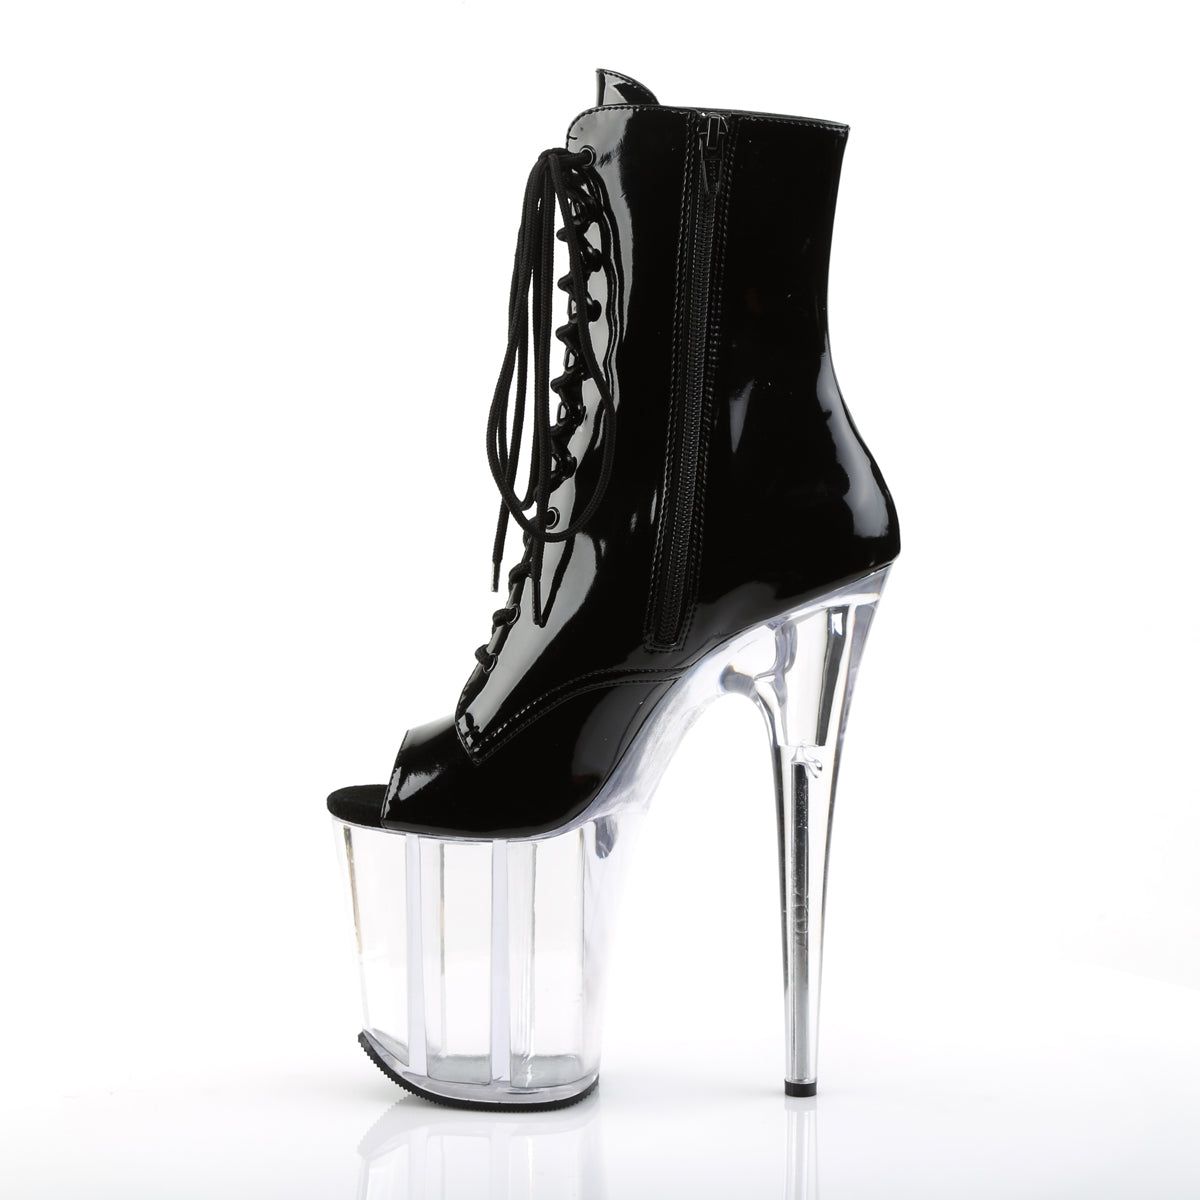 FLAMINGO-1021 8" Heel Black and Clear Pole Dancing Platforms-Pleaser- Sexy Shoes Pole Dance Heels